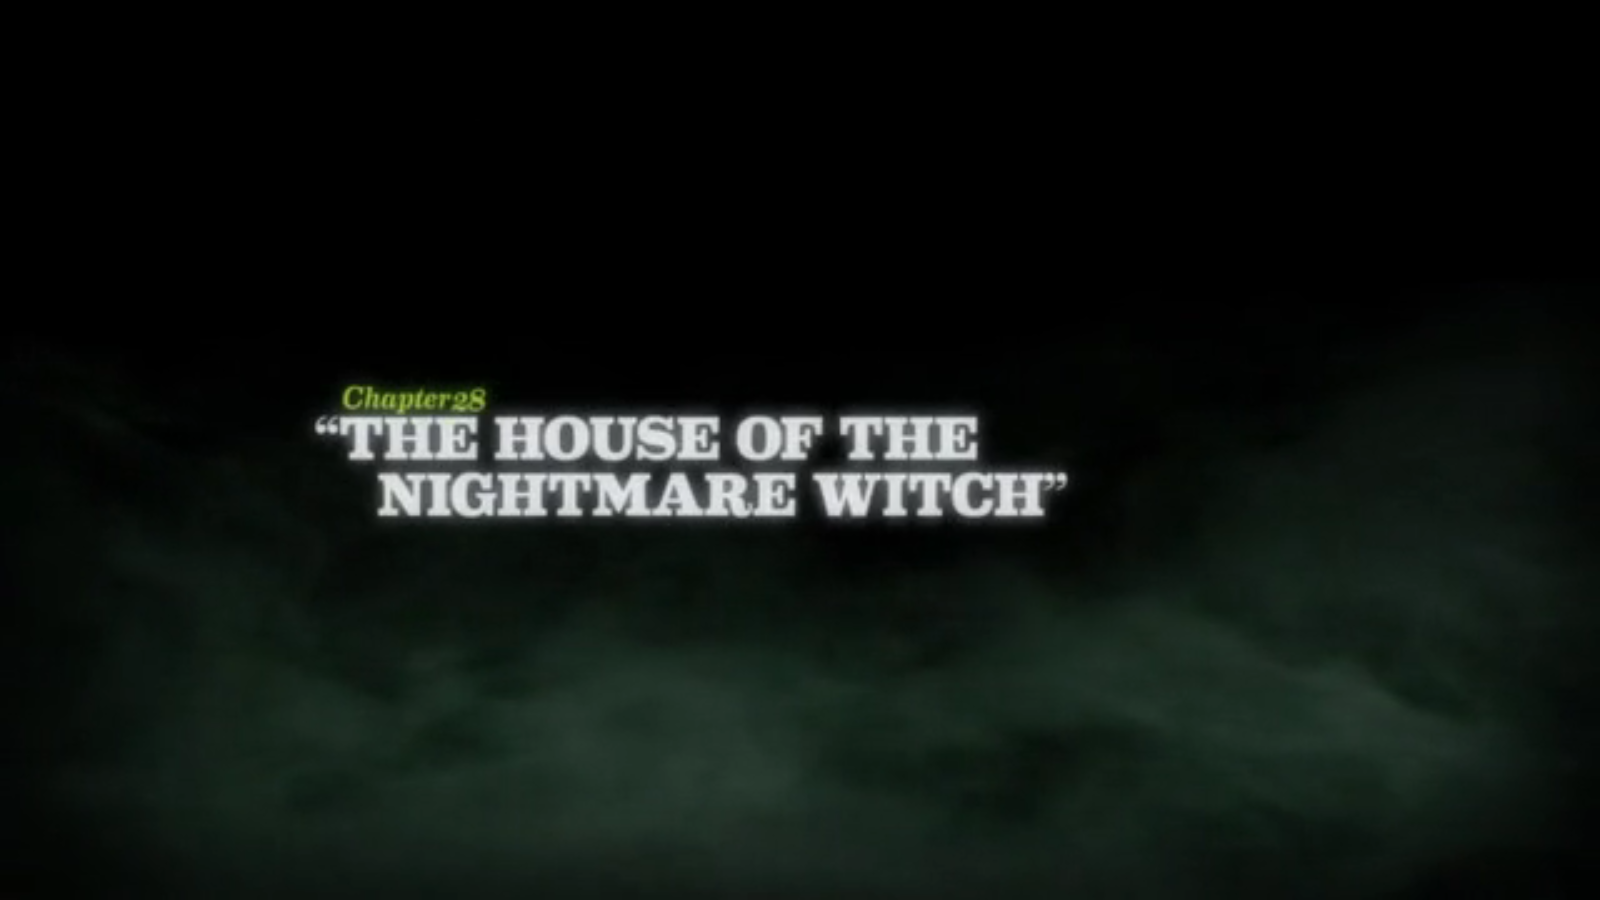 The_House_of_the_Nightmare_Witch_title_card